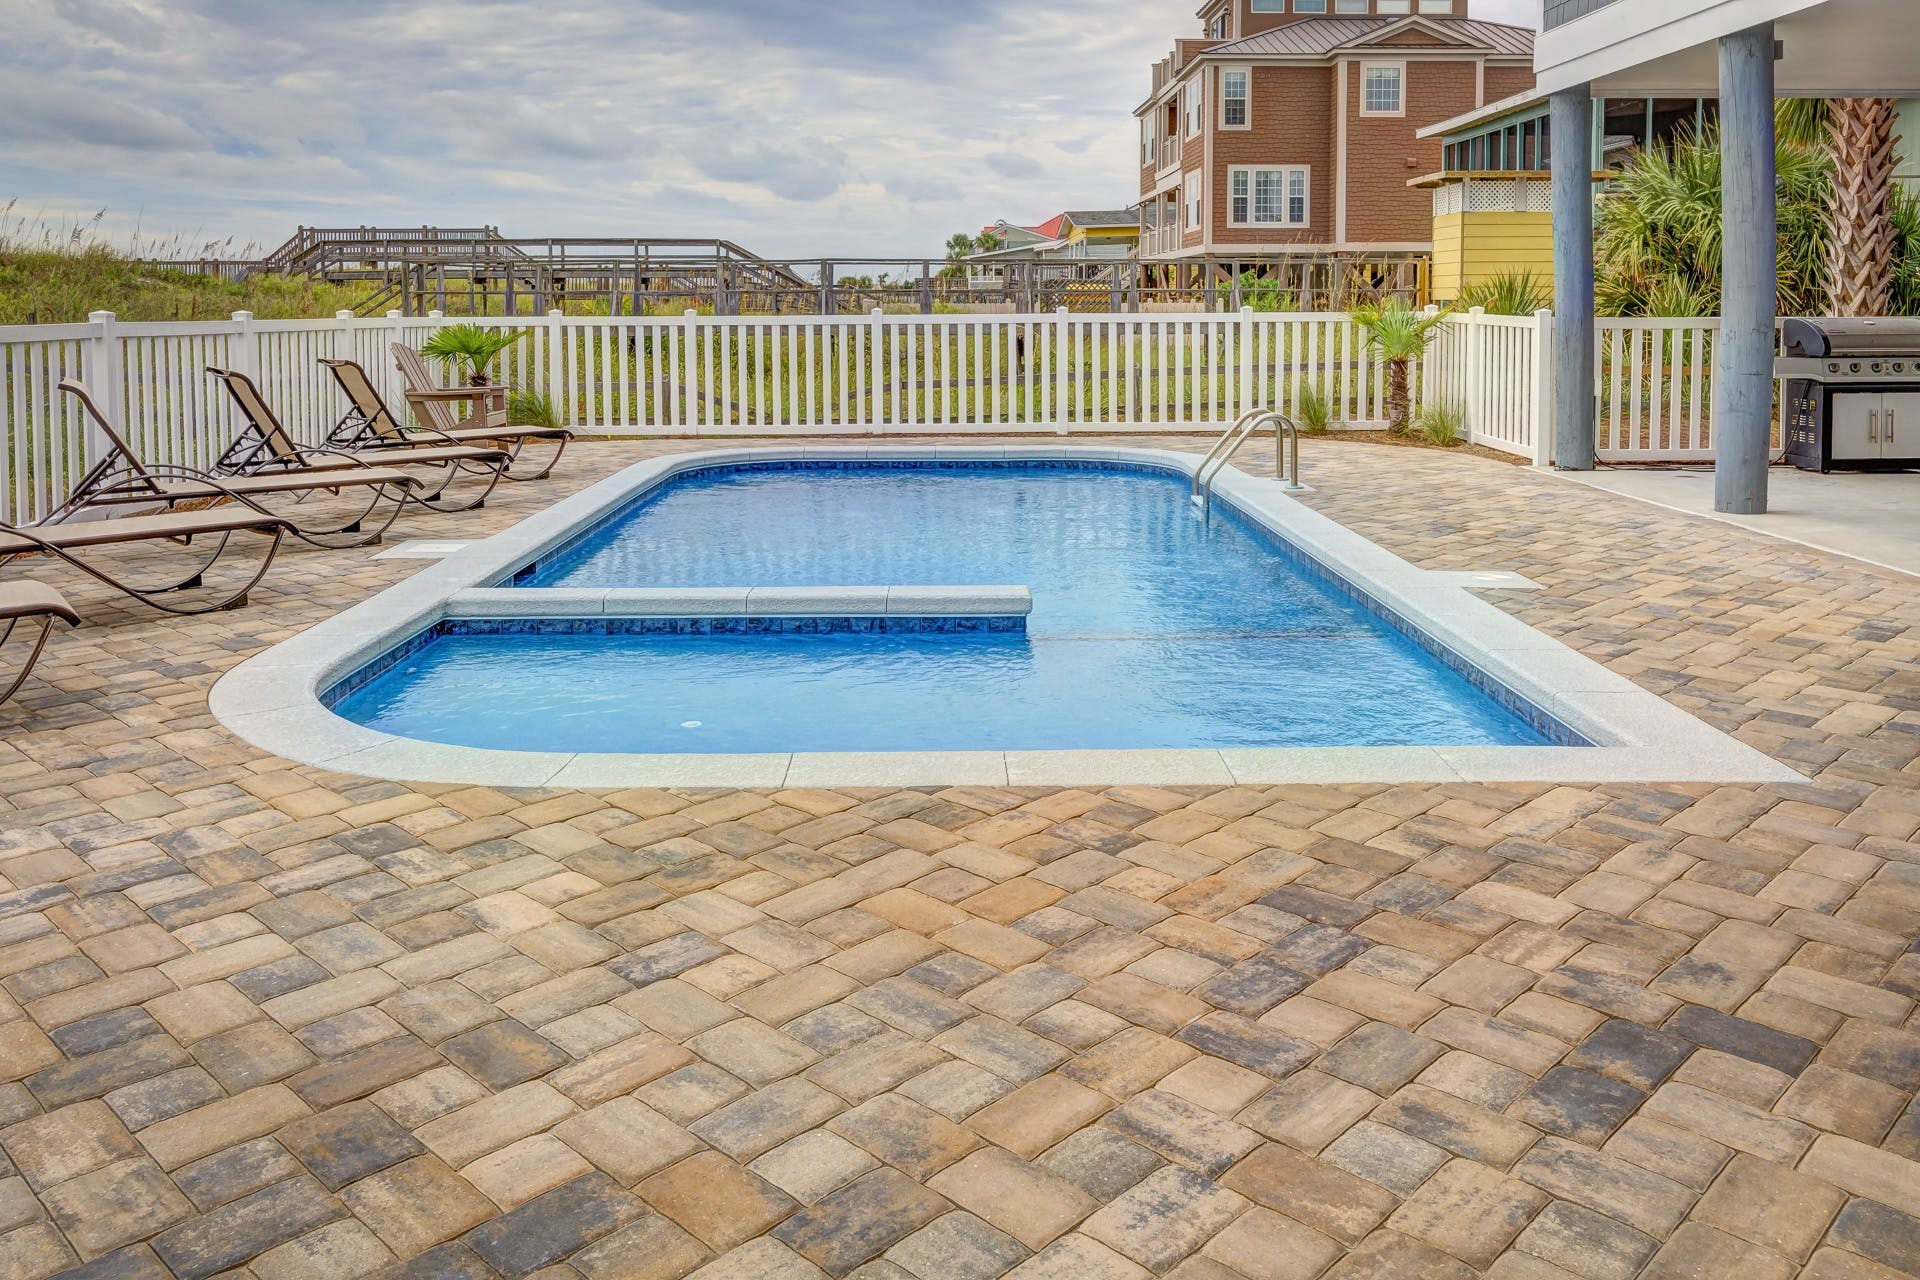 Get Inspiration for Your Pool with These 3 Pool Design Trends